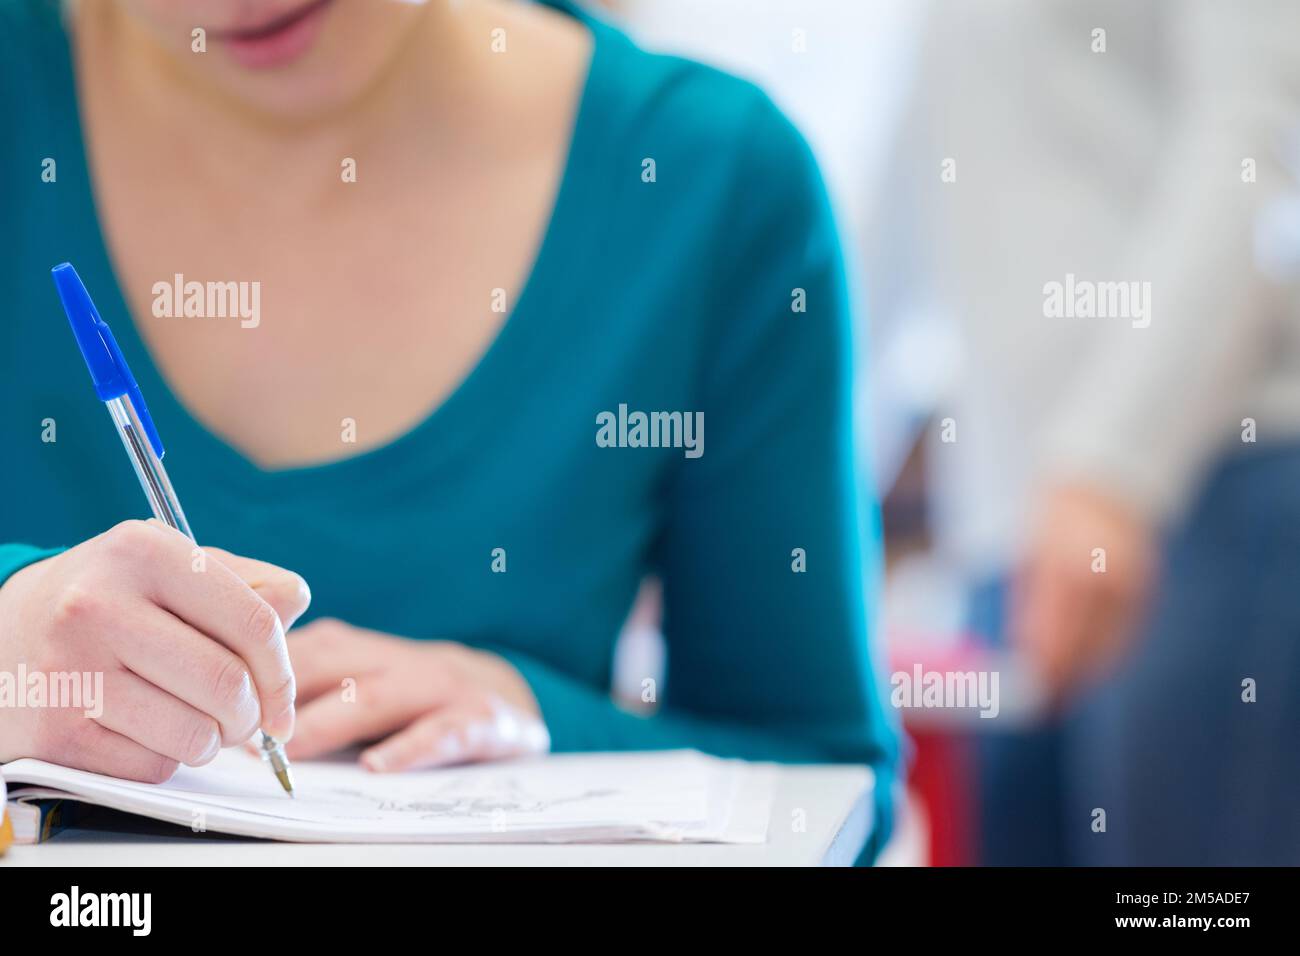 university or high school student holding pencil on final exam Stock Photo